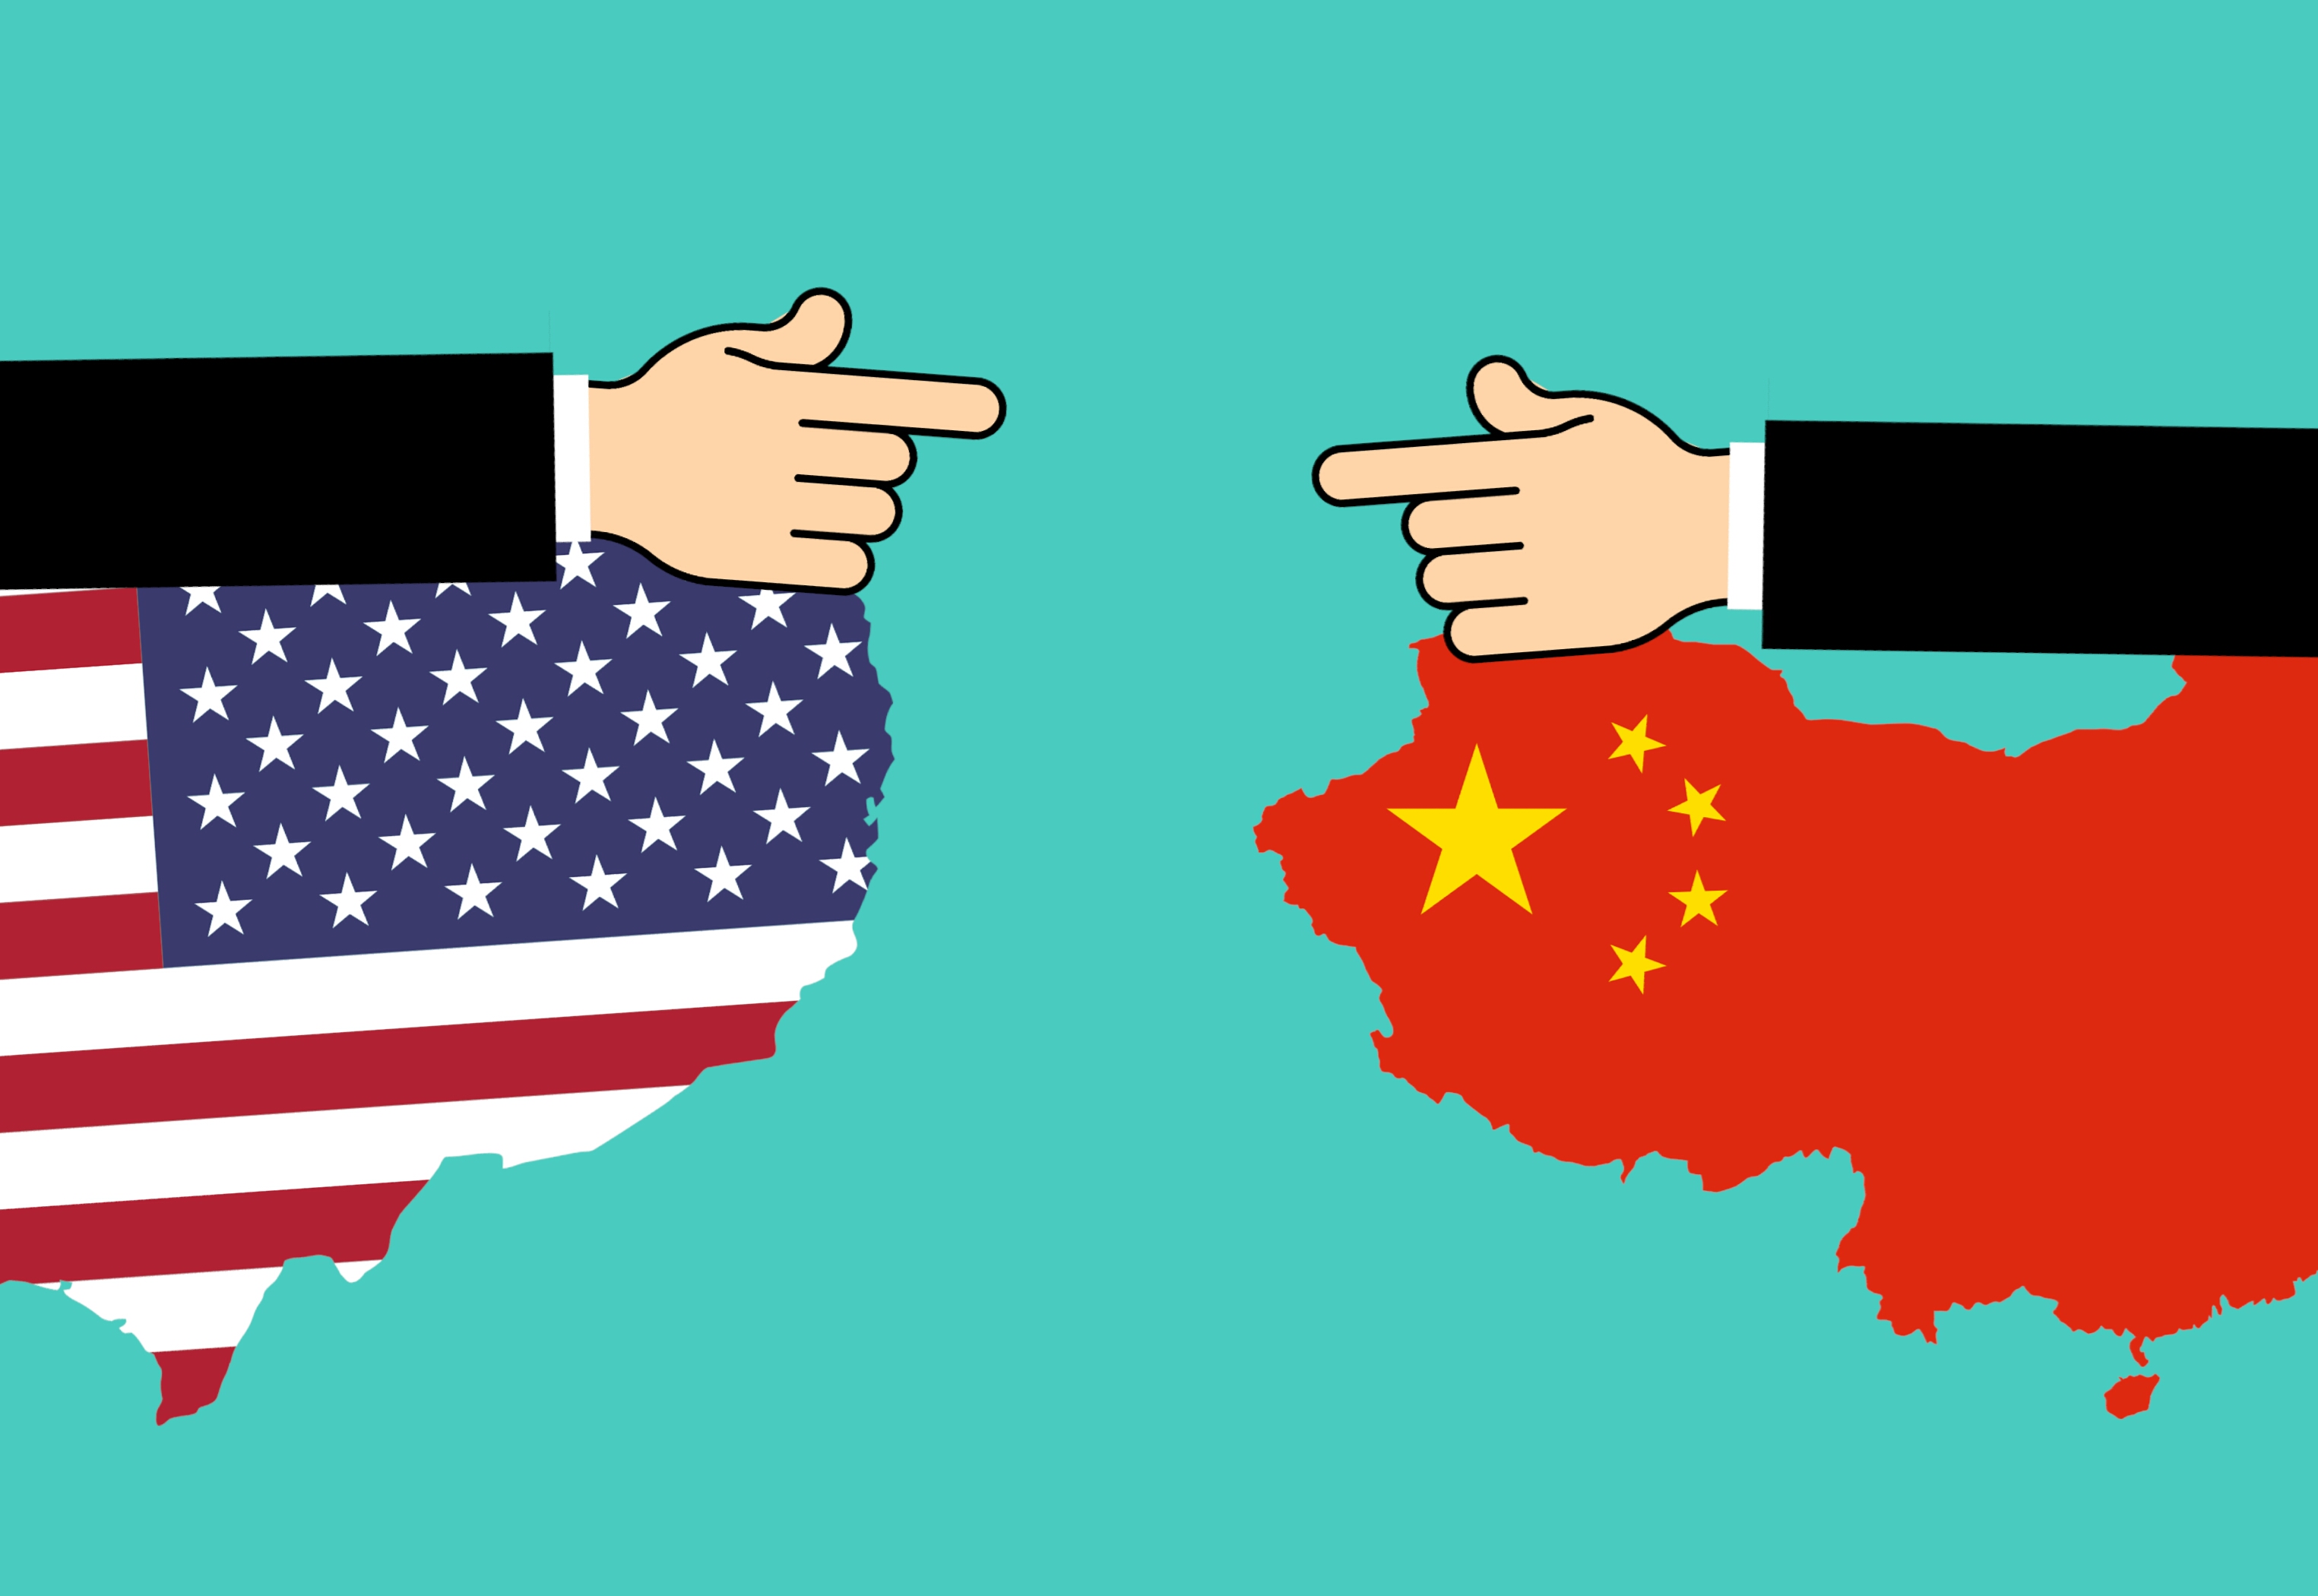 US and China flags and hands pointing